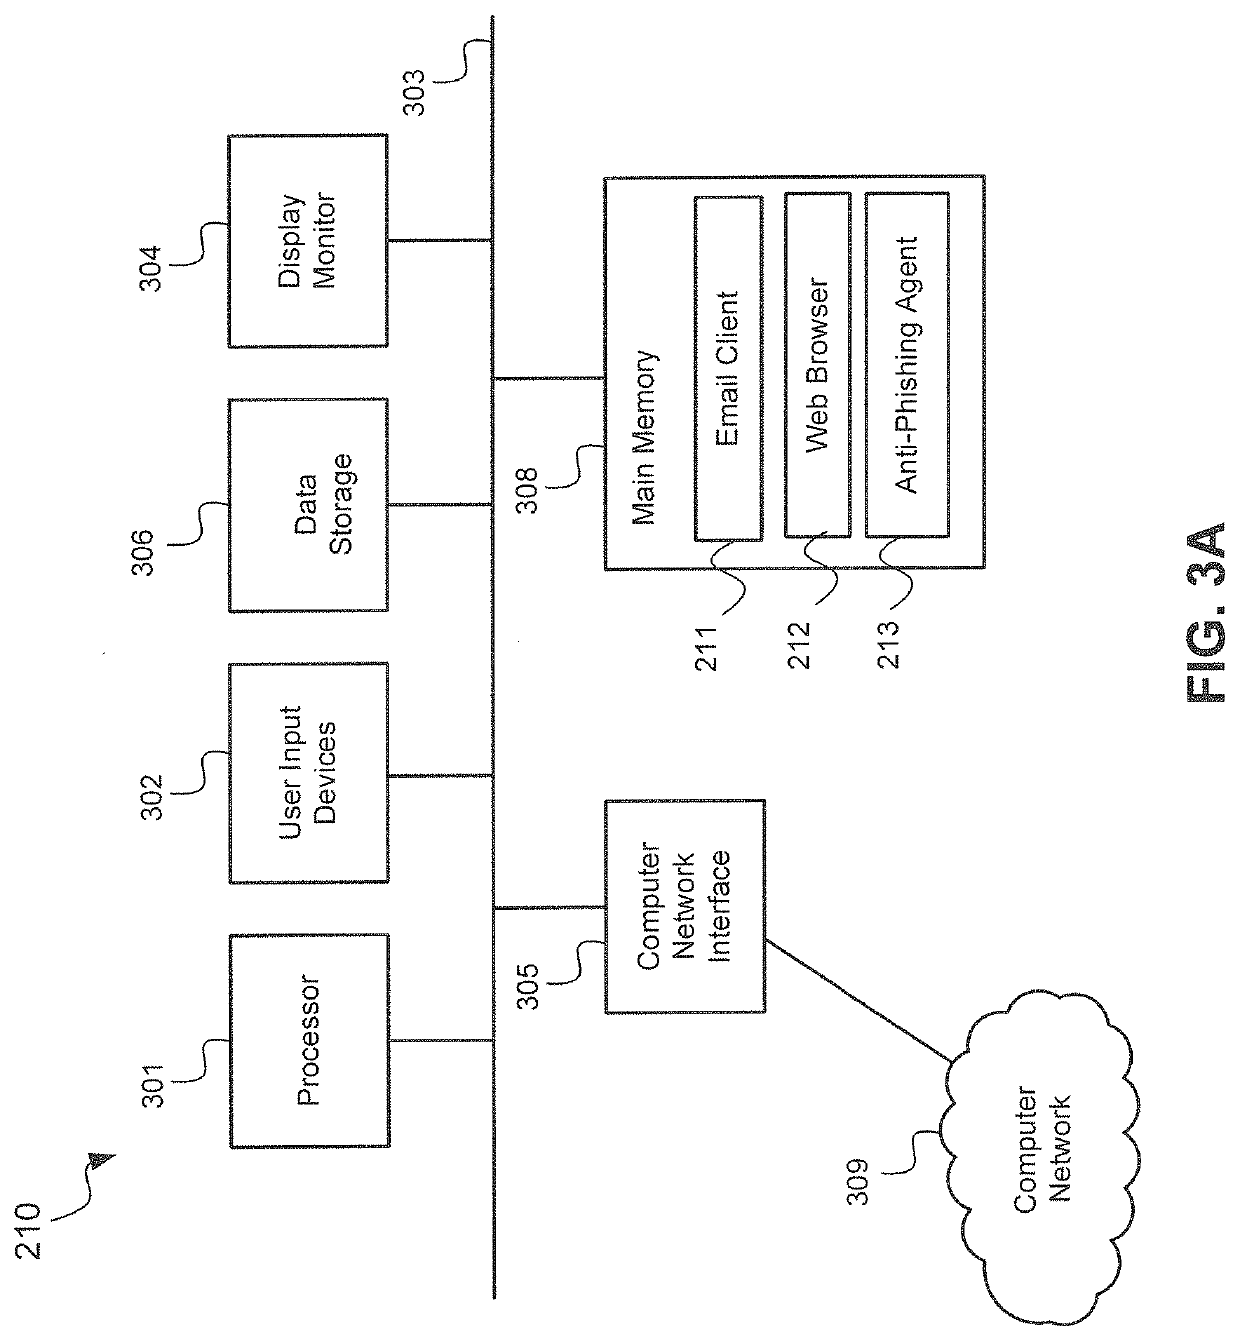 Anti-phishing system and method using computer vision to match identifiable key information